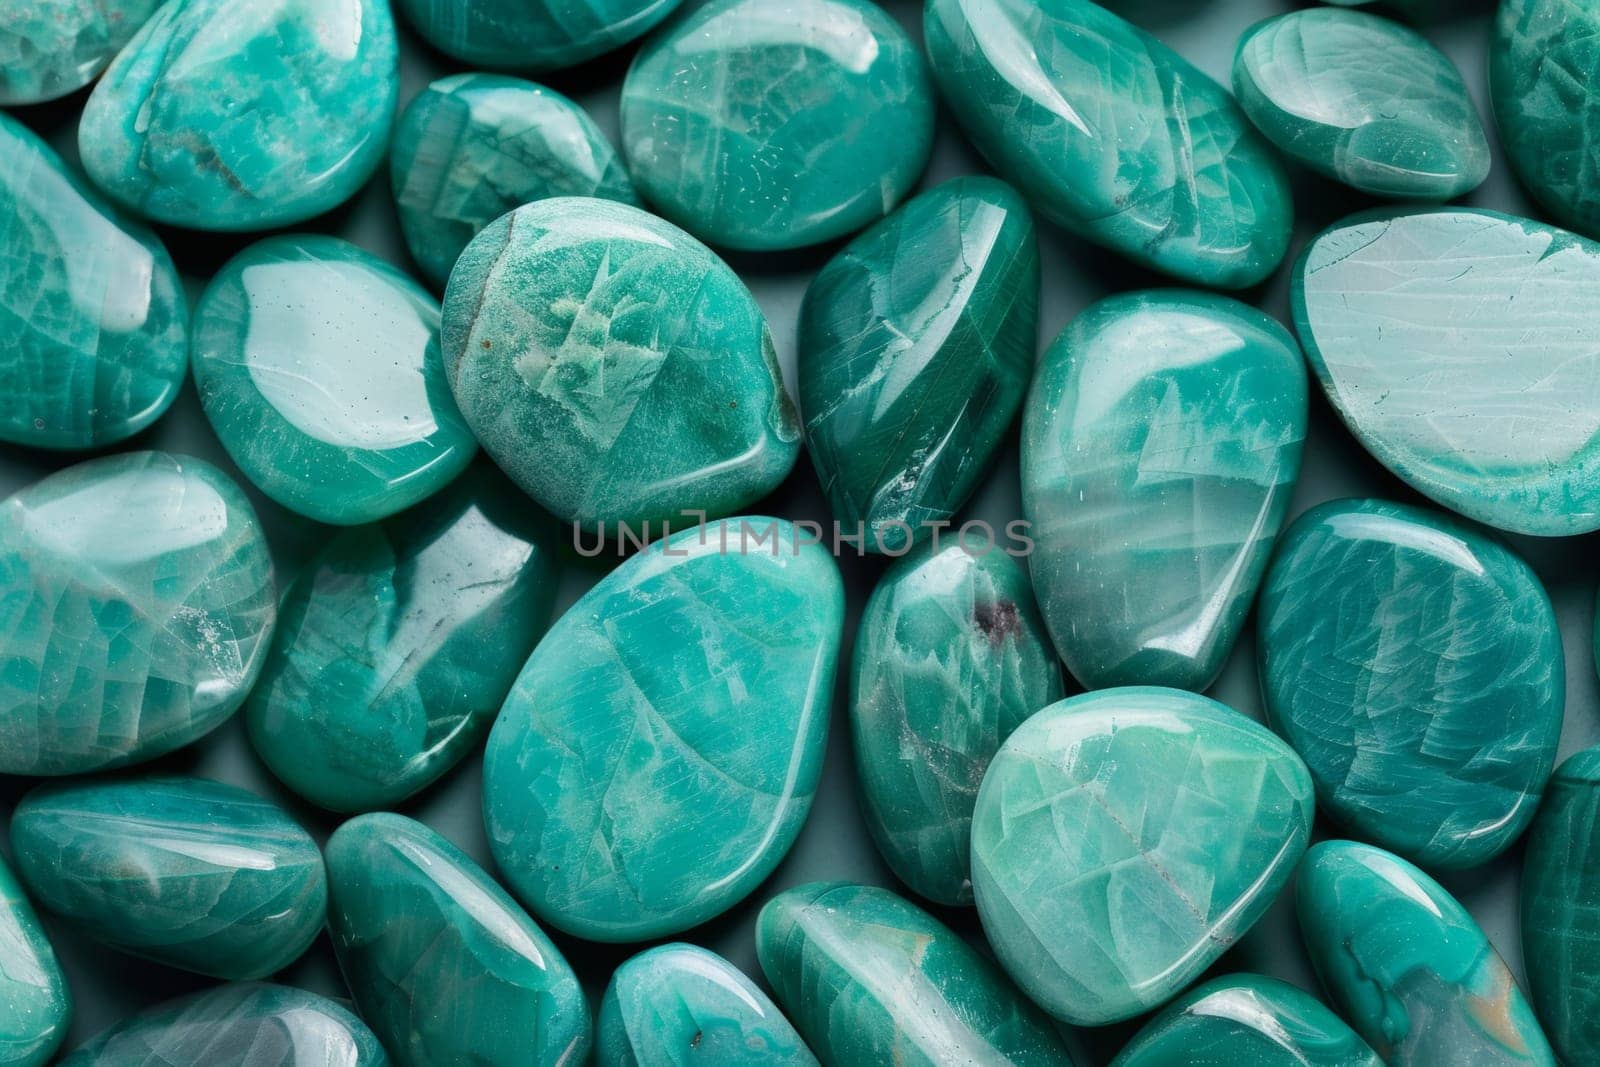 Background with turquoise emerald-colored stones.